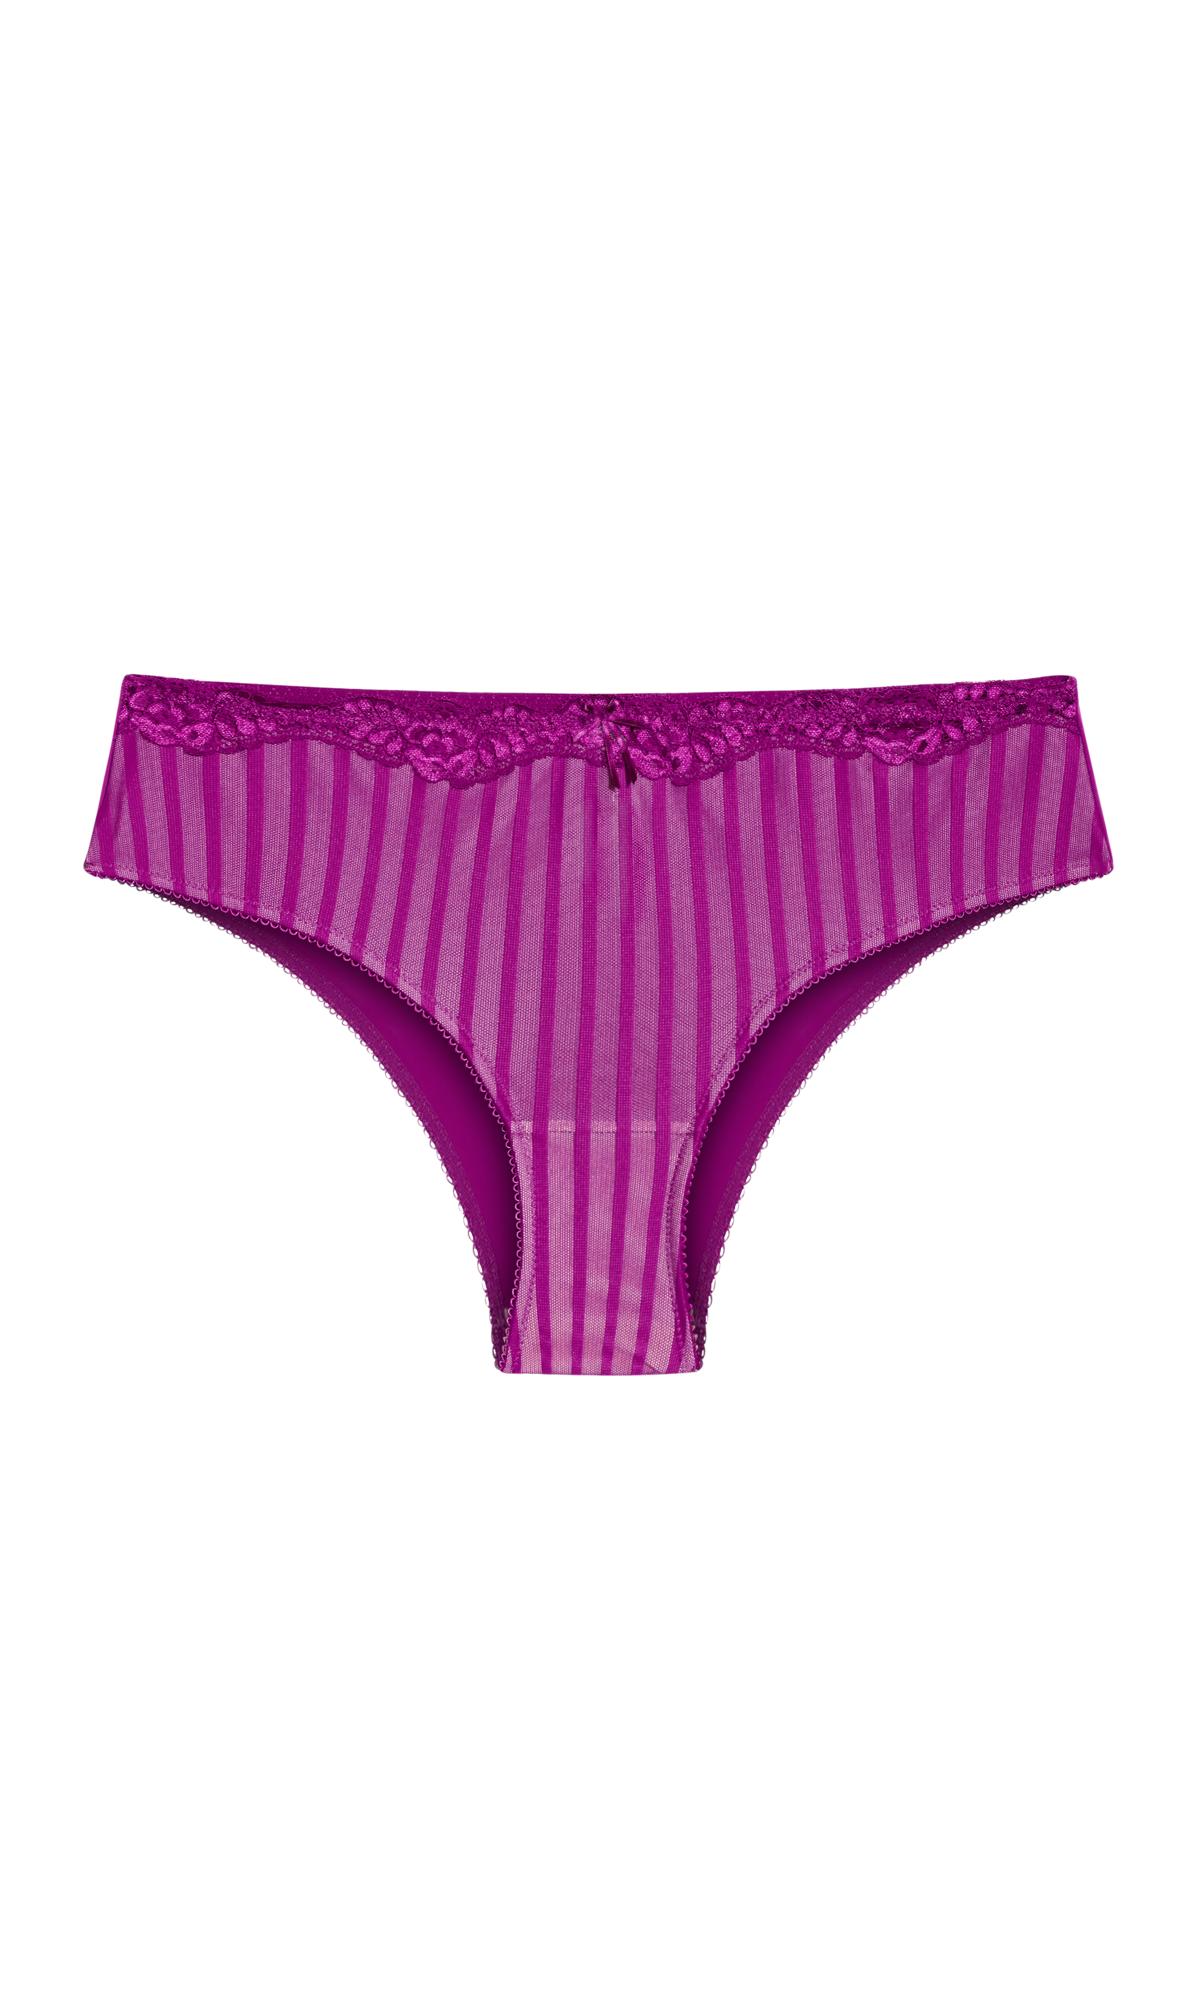 Fifi Magenta Pink Lace Trimmed Shorty 3